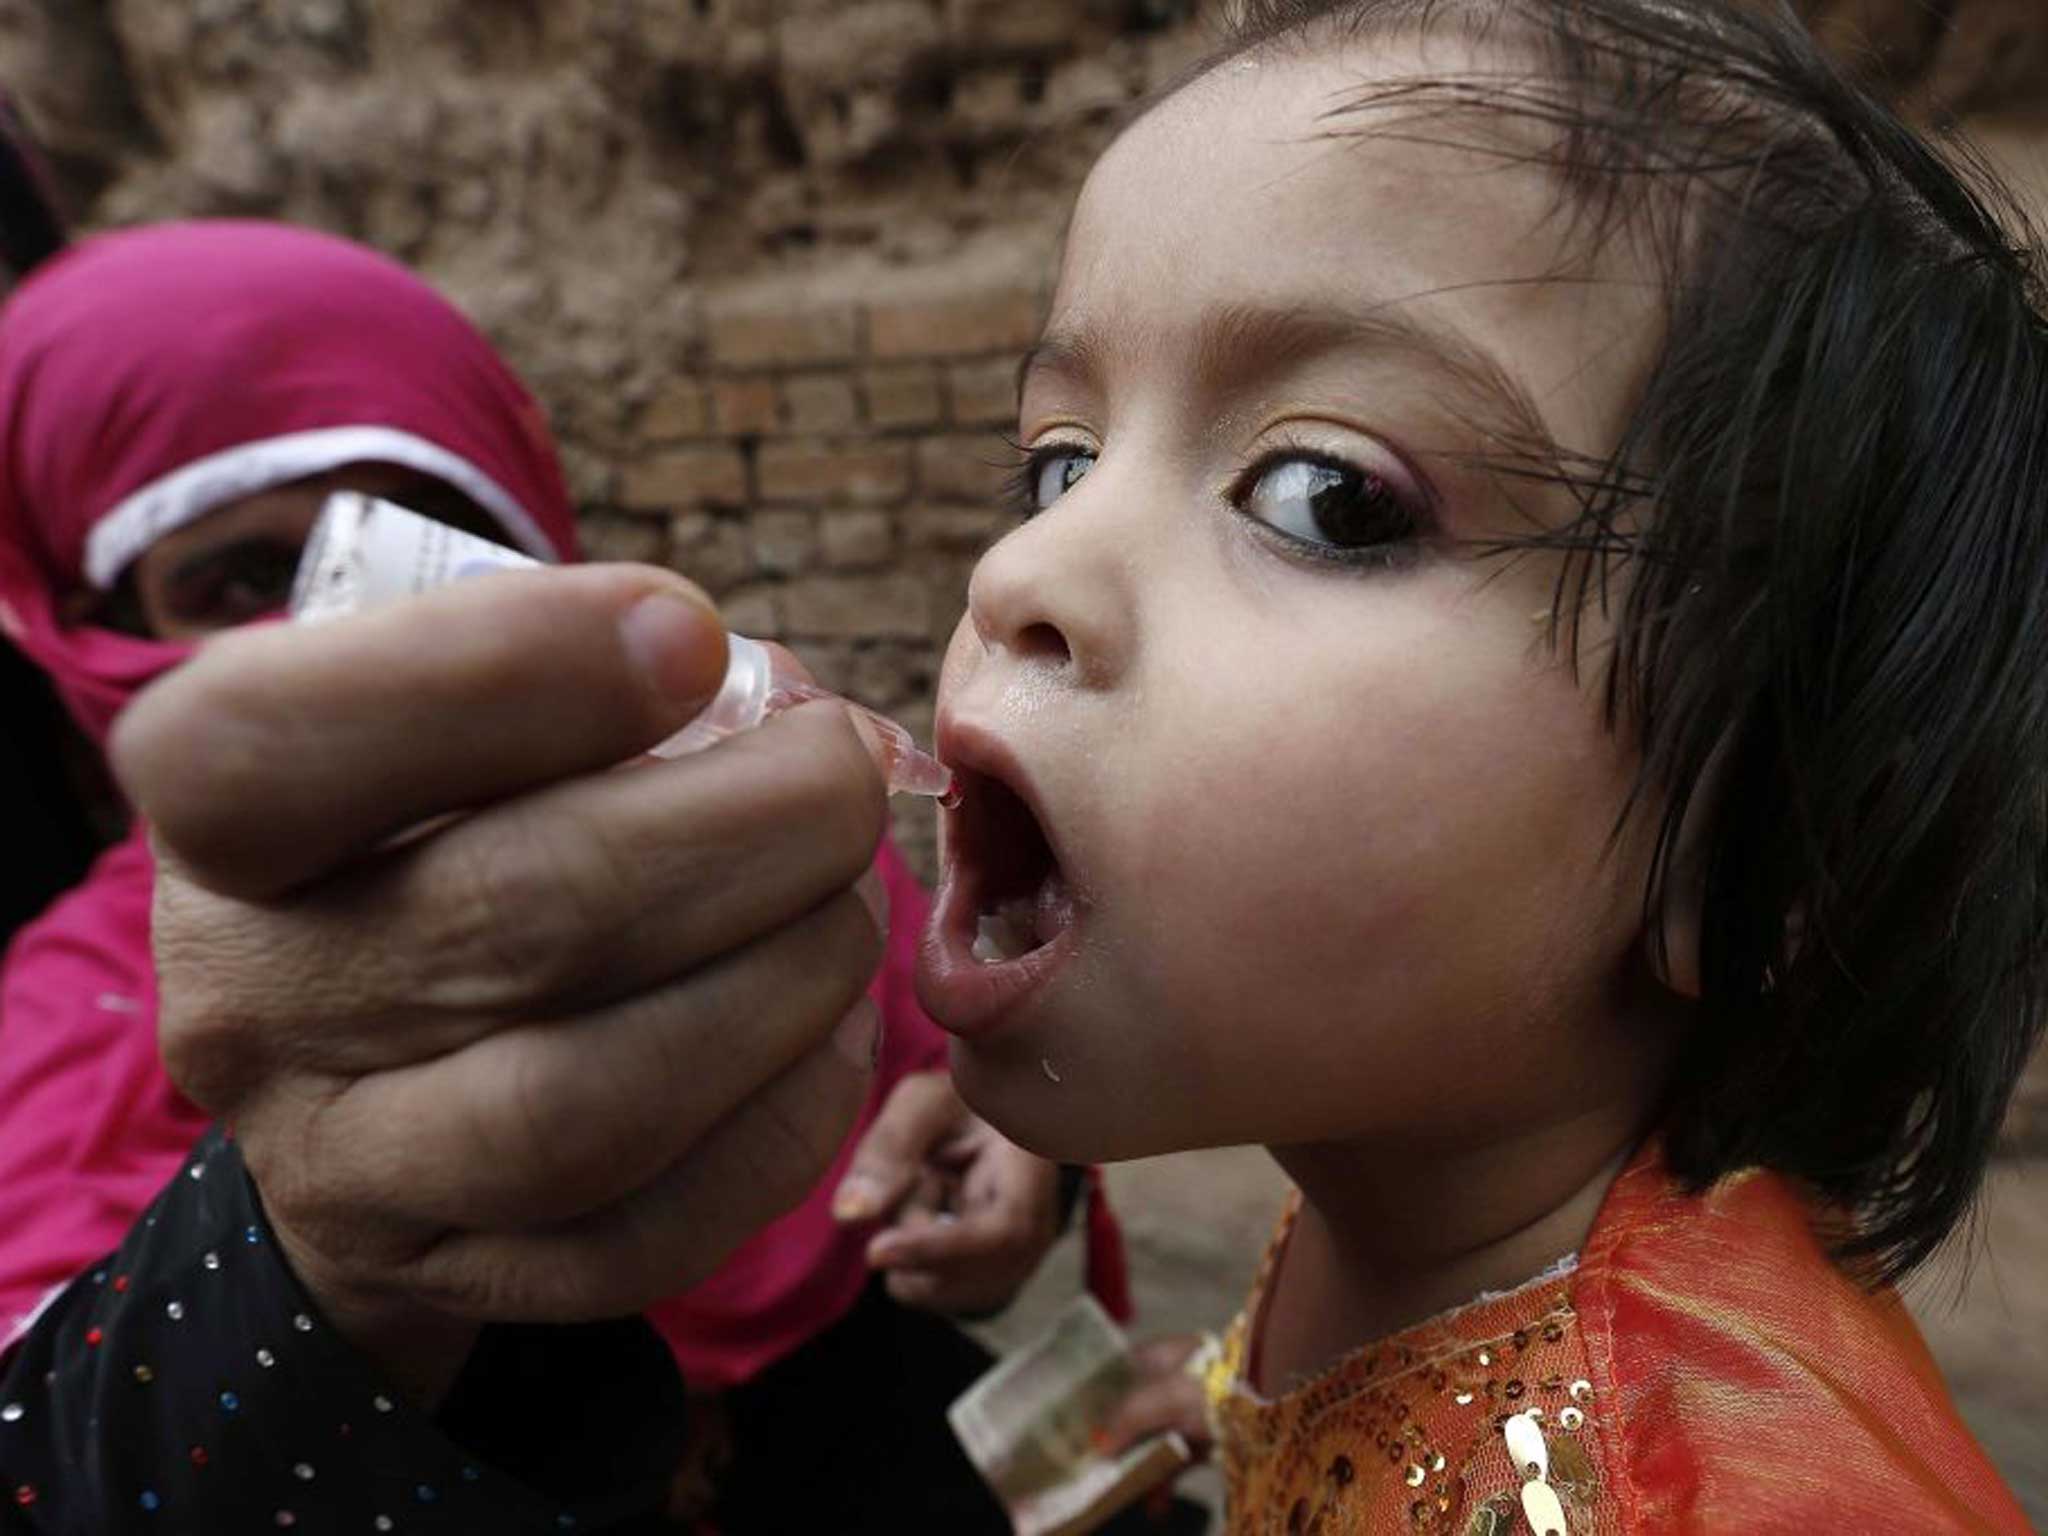 The UK aims to help vaccinate up to 360 million children by 2018